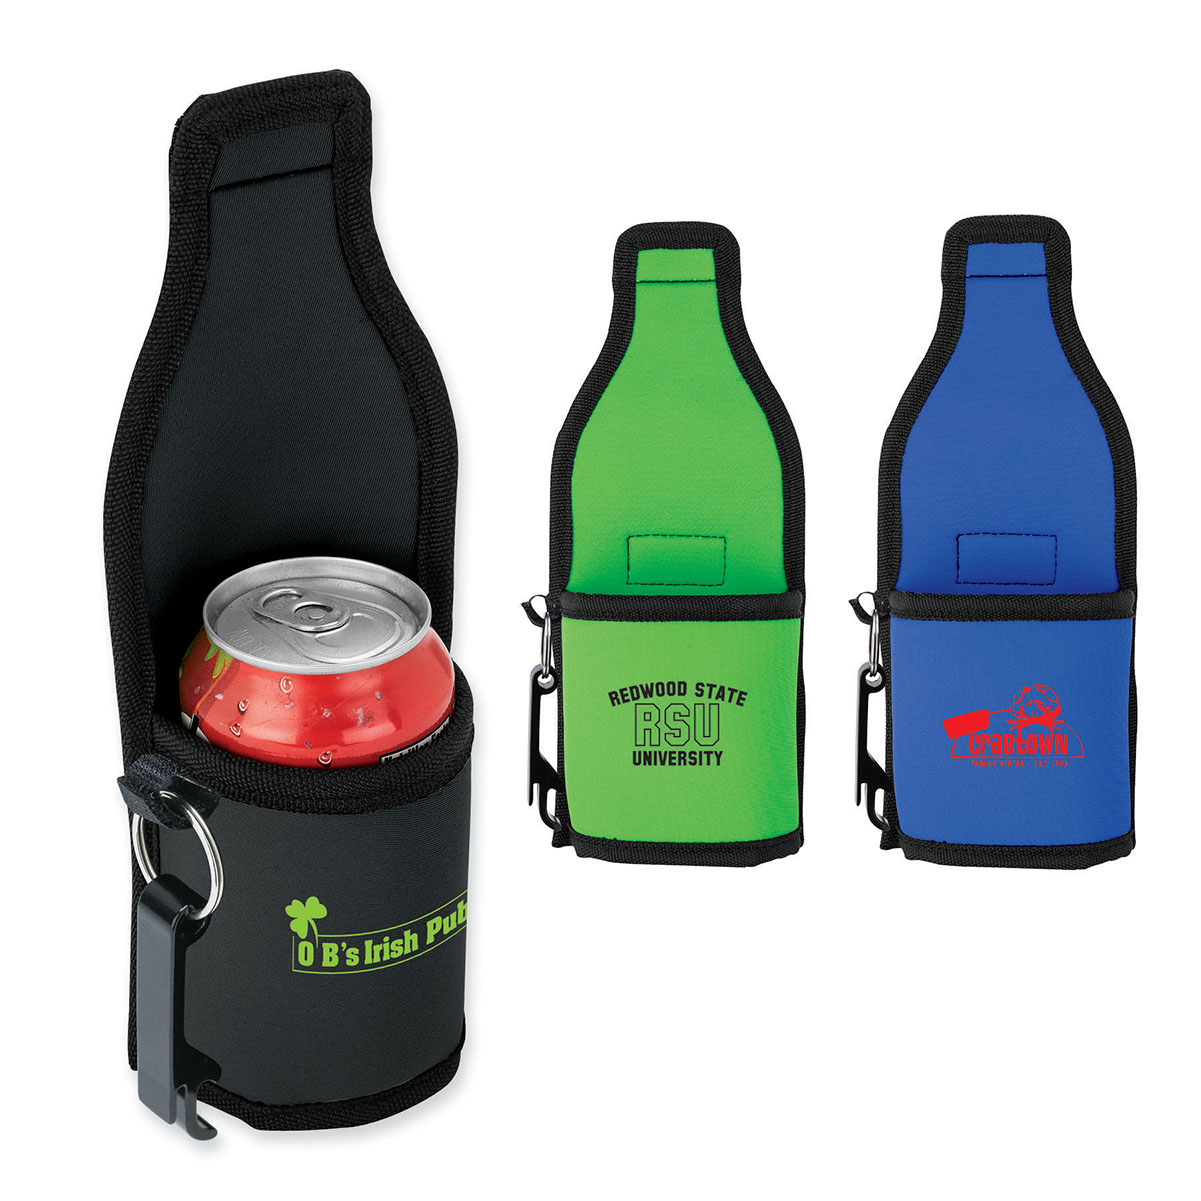 Branded items. Кана с бутылкой. Can Bottle. Drink promotional items.